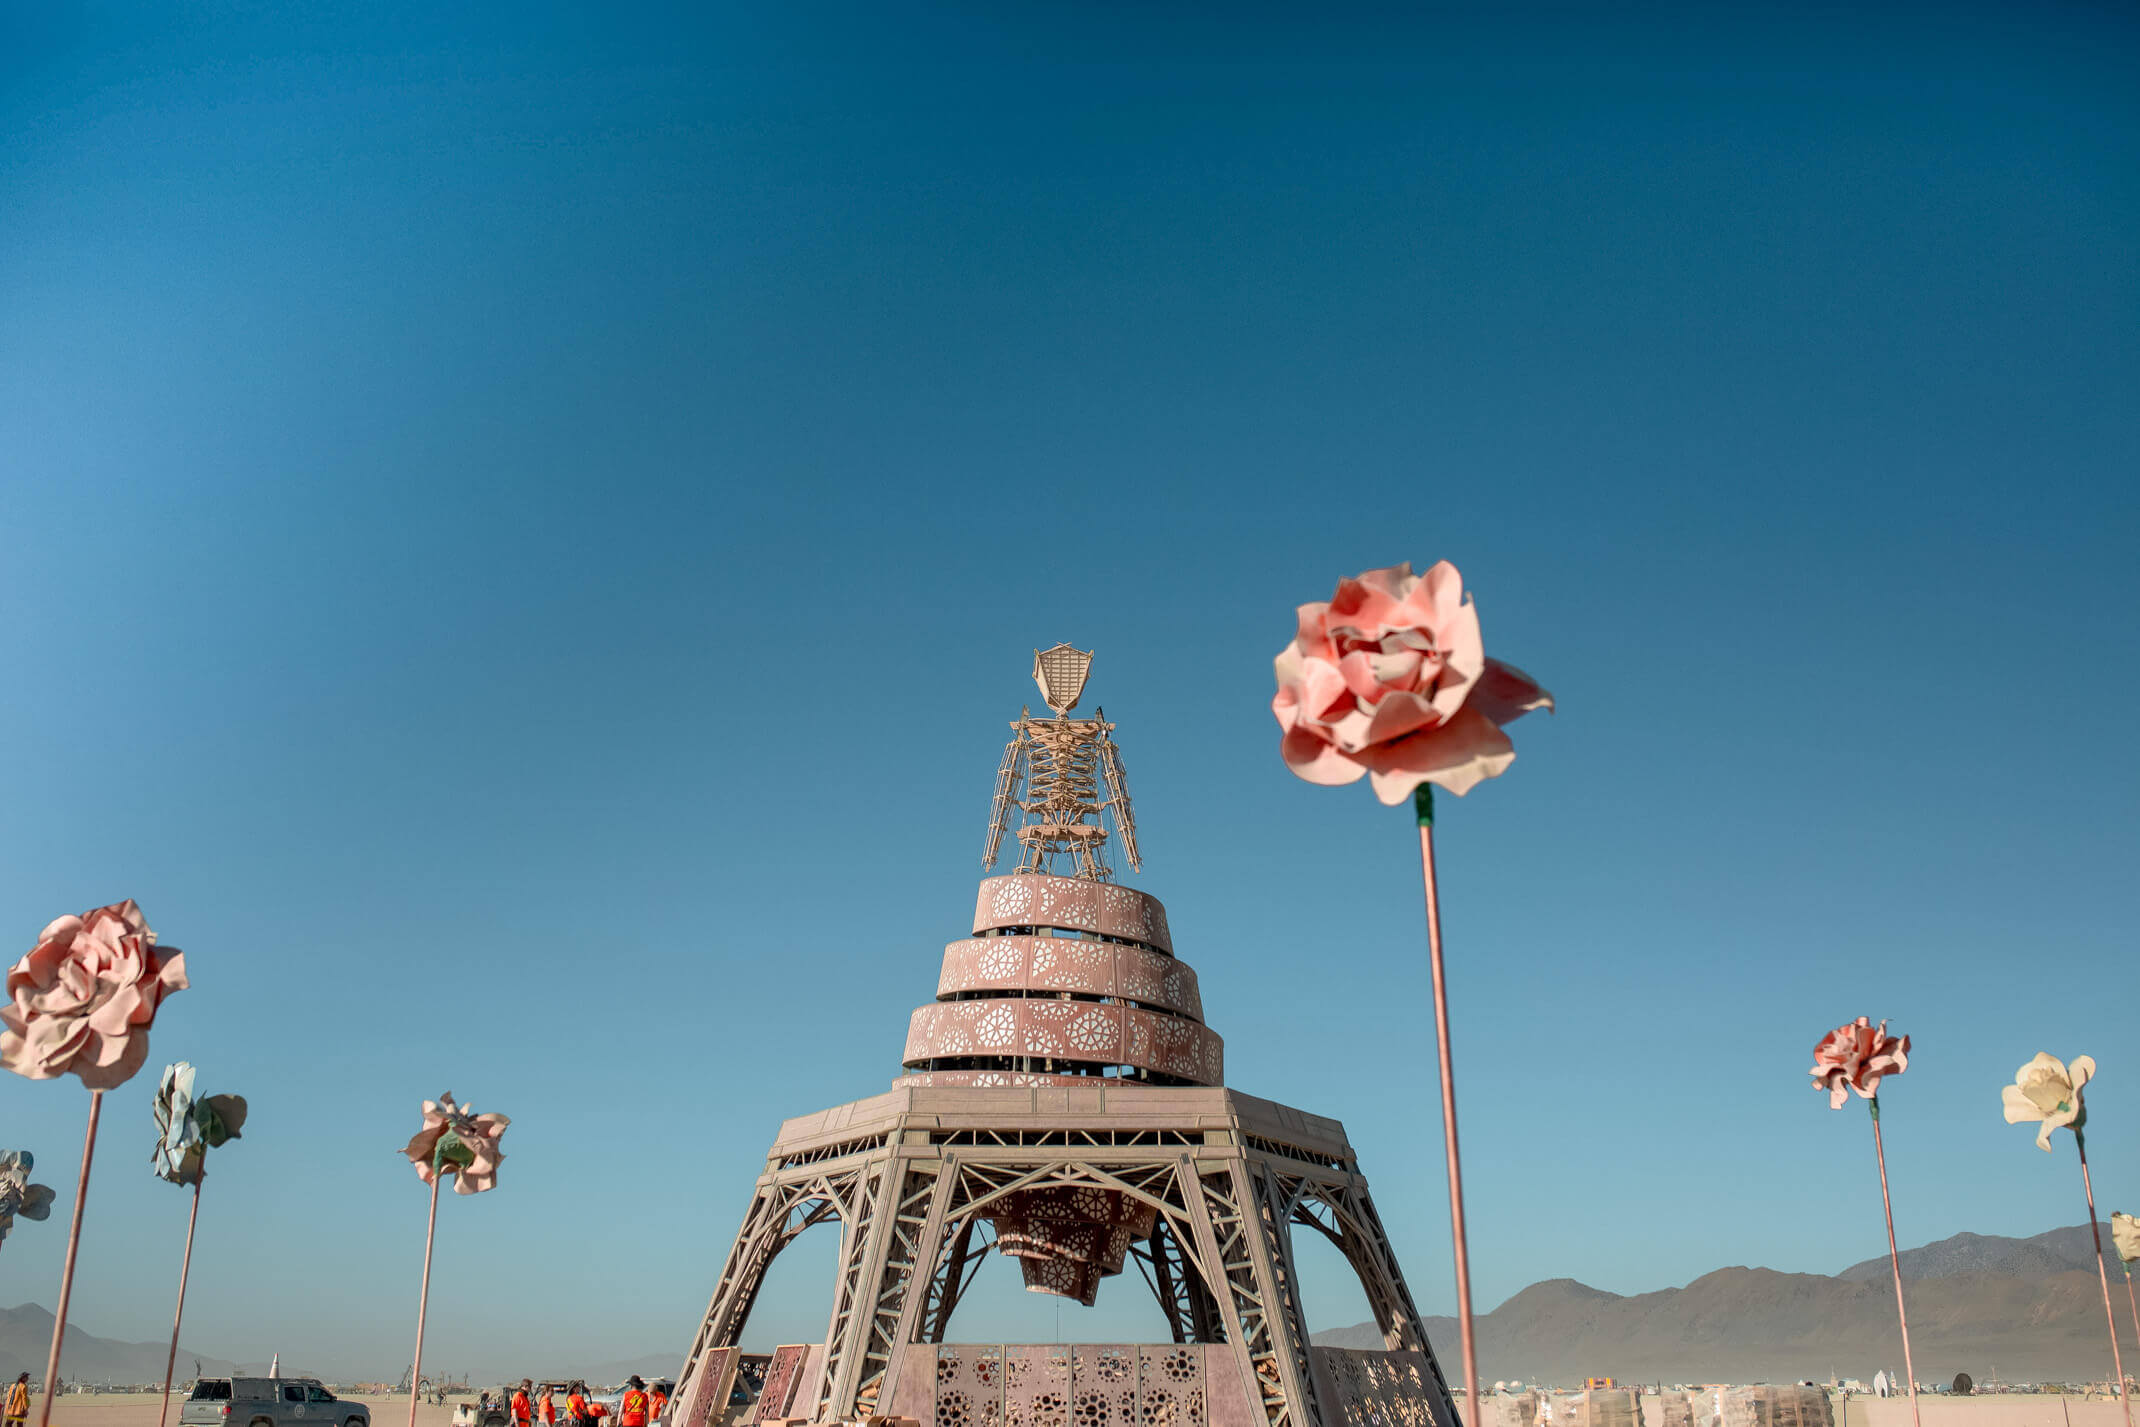 How to plan Burning Man if you're flying in internationally